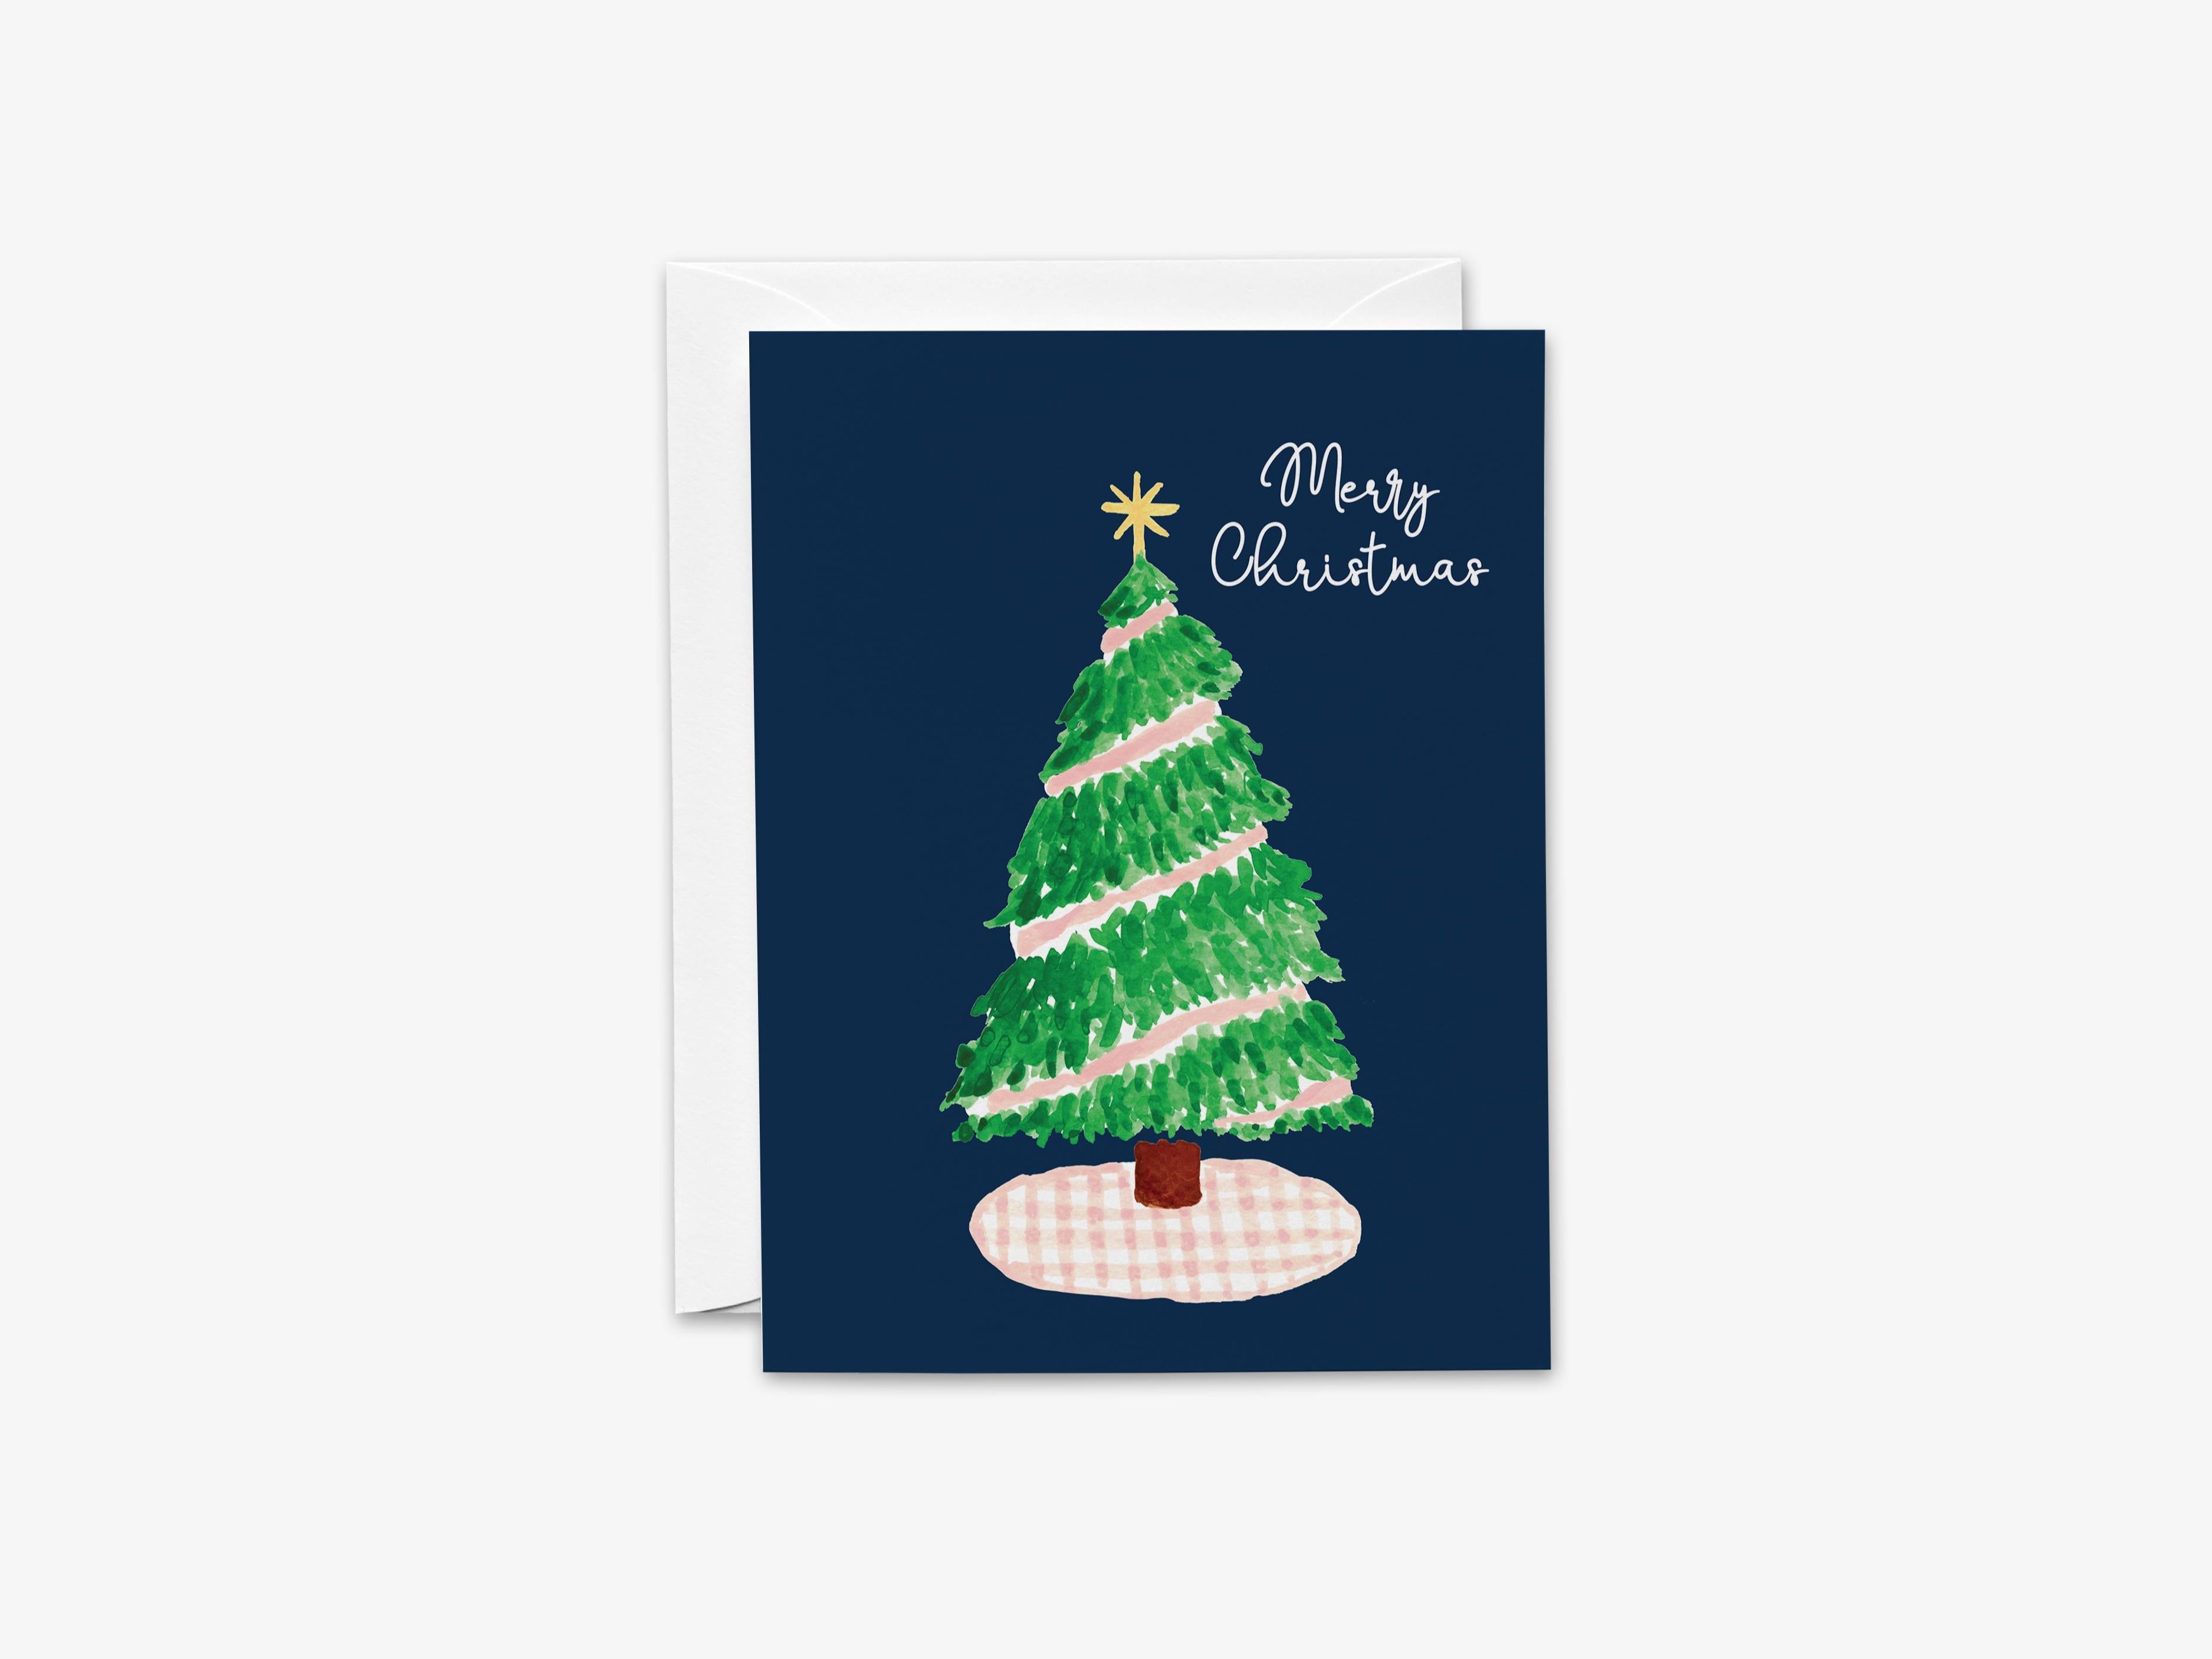 Merry Christmas Pink Gingham Tree Greeting Card-These folded greeting cards are 4.25x5.5 and feature our hand-painted Christmas tree and pink gingham, printed in the USA on 100lb textured stock. They come with a White envelope and make a great Christmas card for the tree lover in your life.-The Singing Little Bird